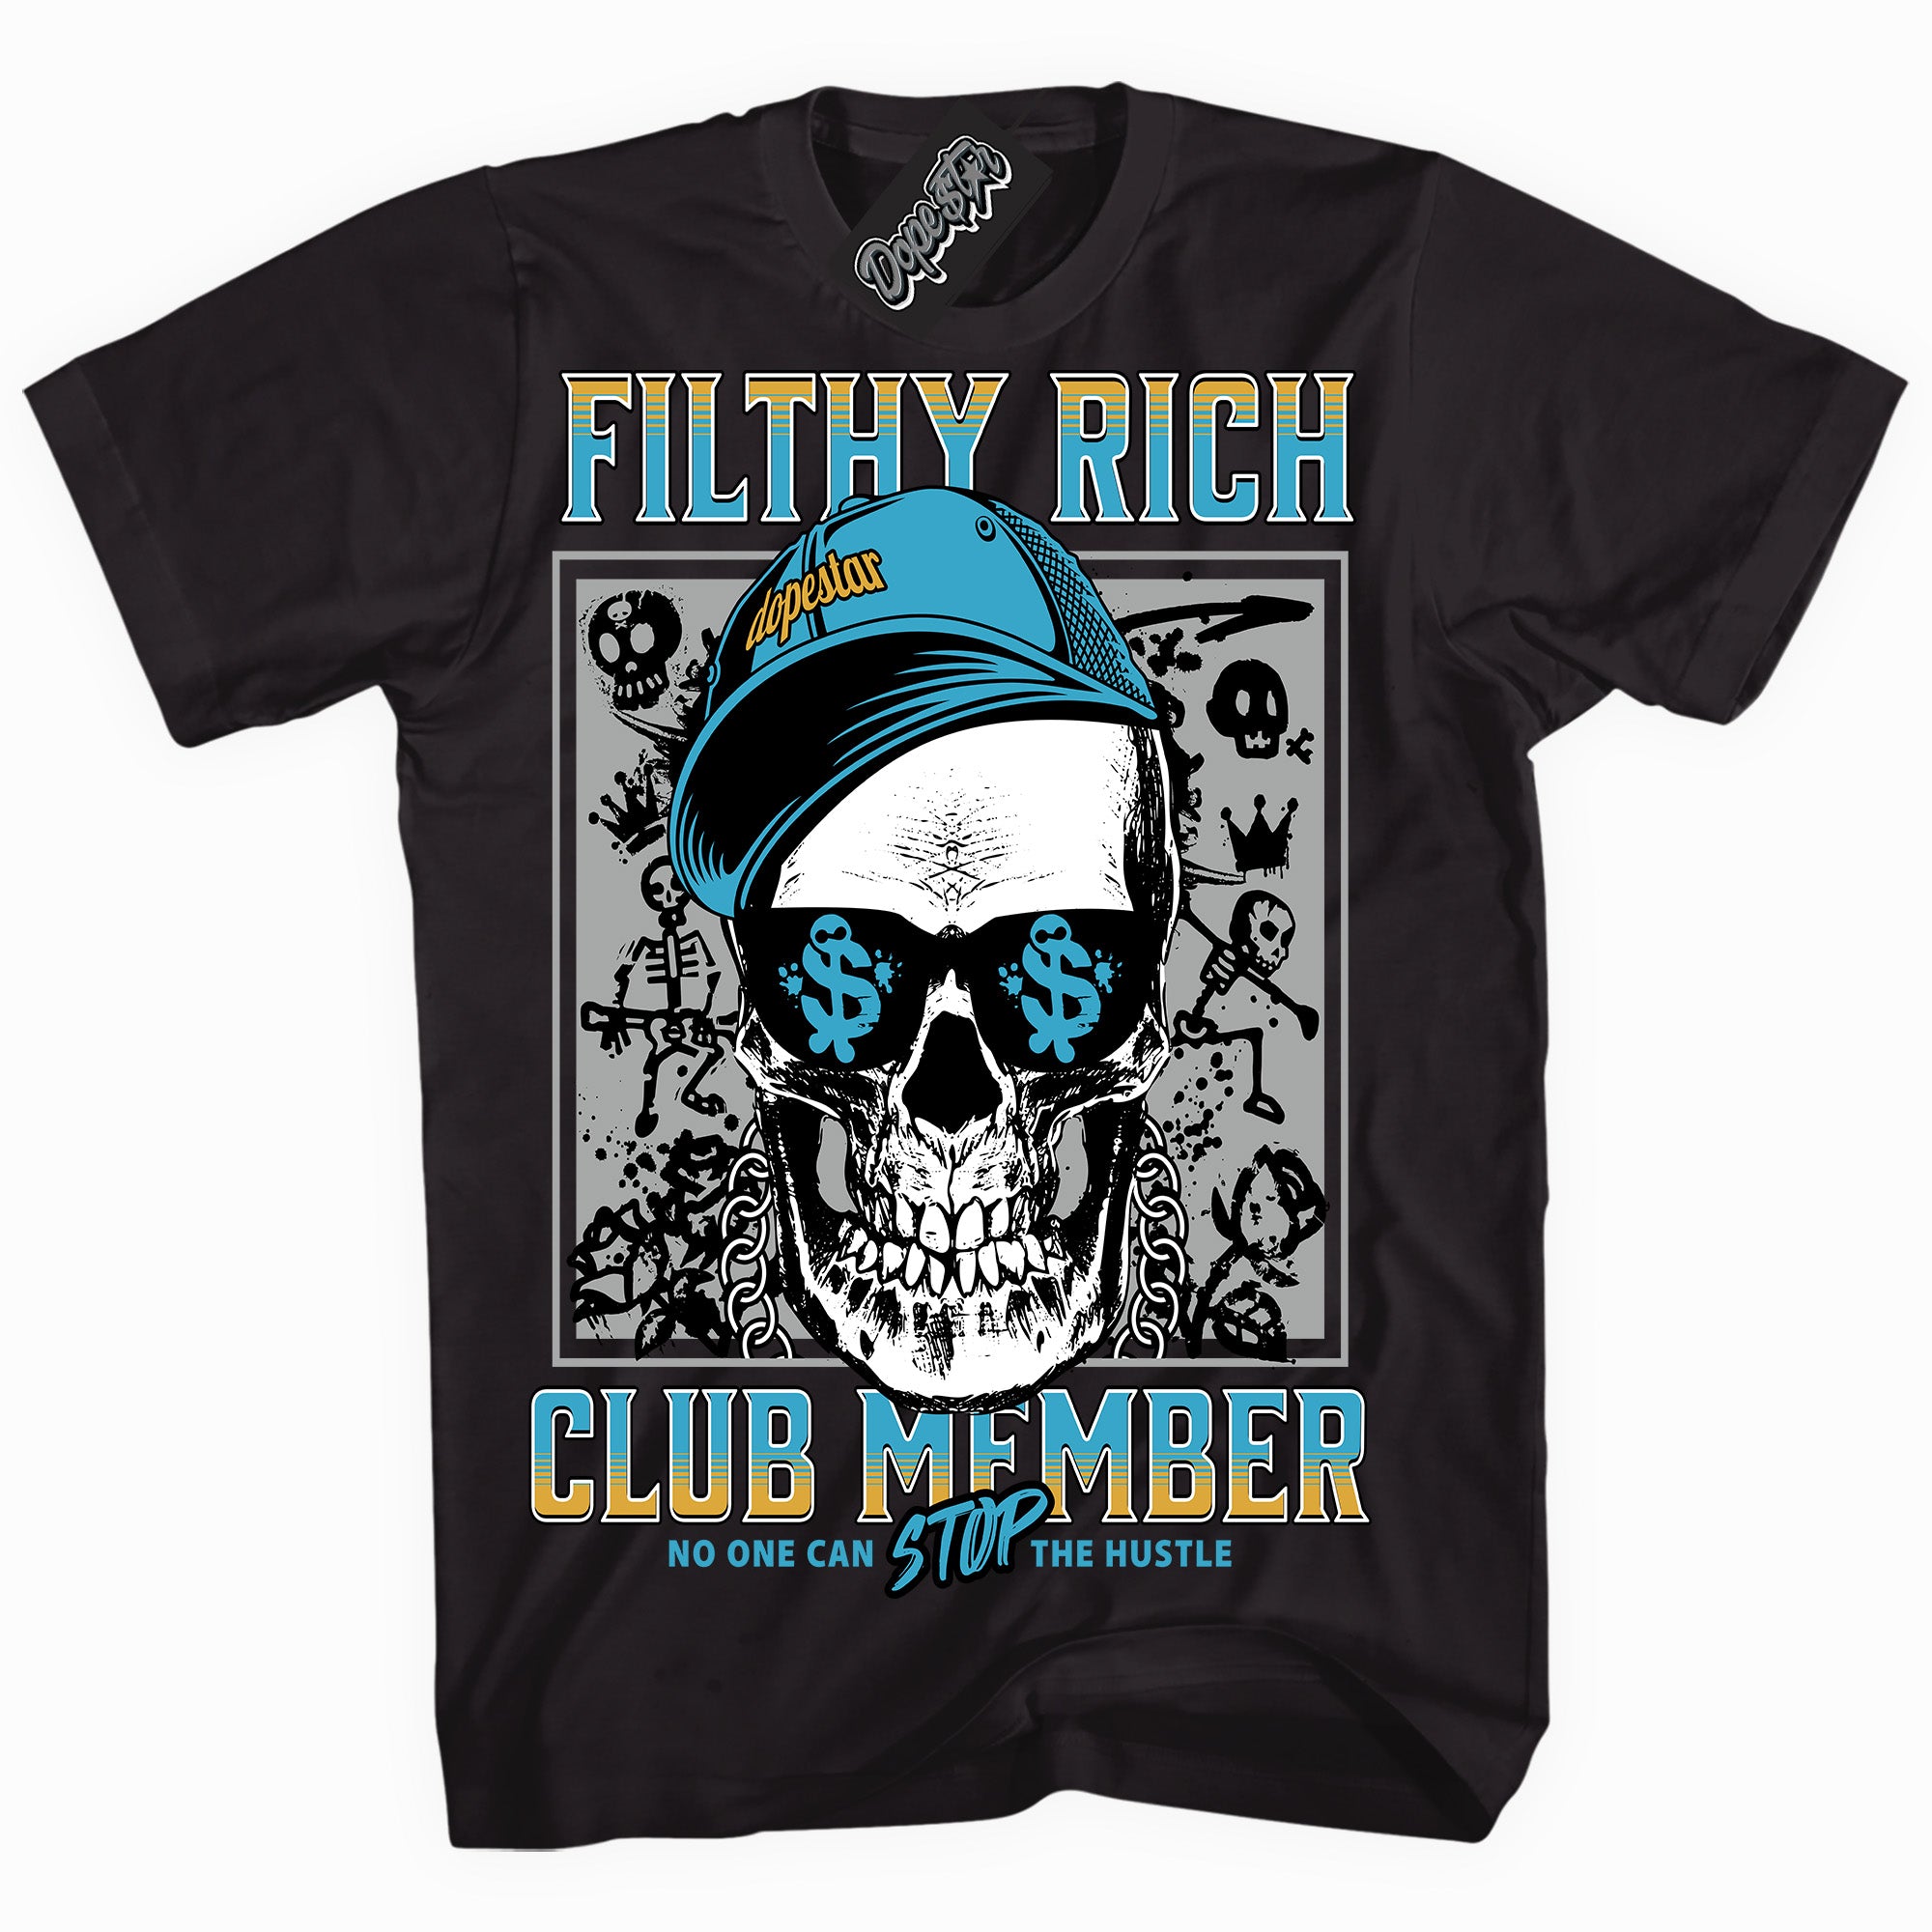 Cool Black graphic tee with “ Filthy Rich ” print, that perfectly matches AQUA 5s sneakers